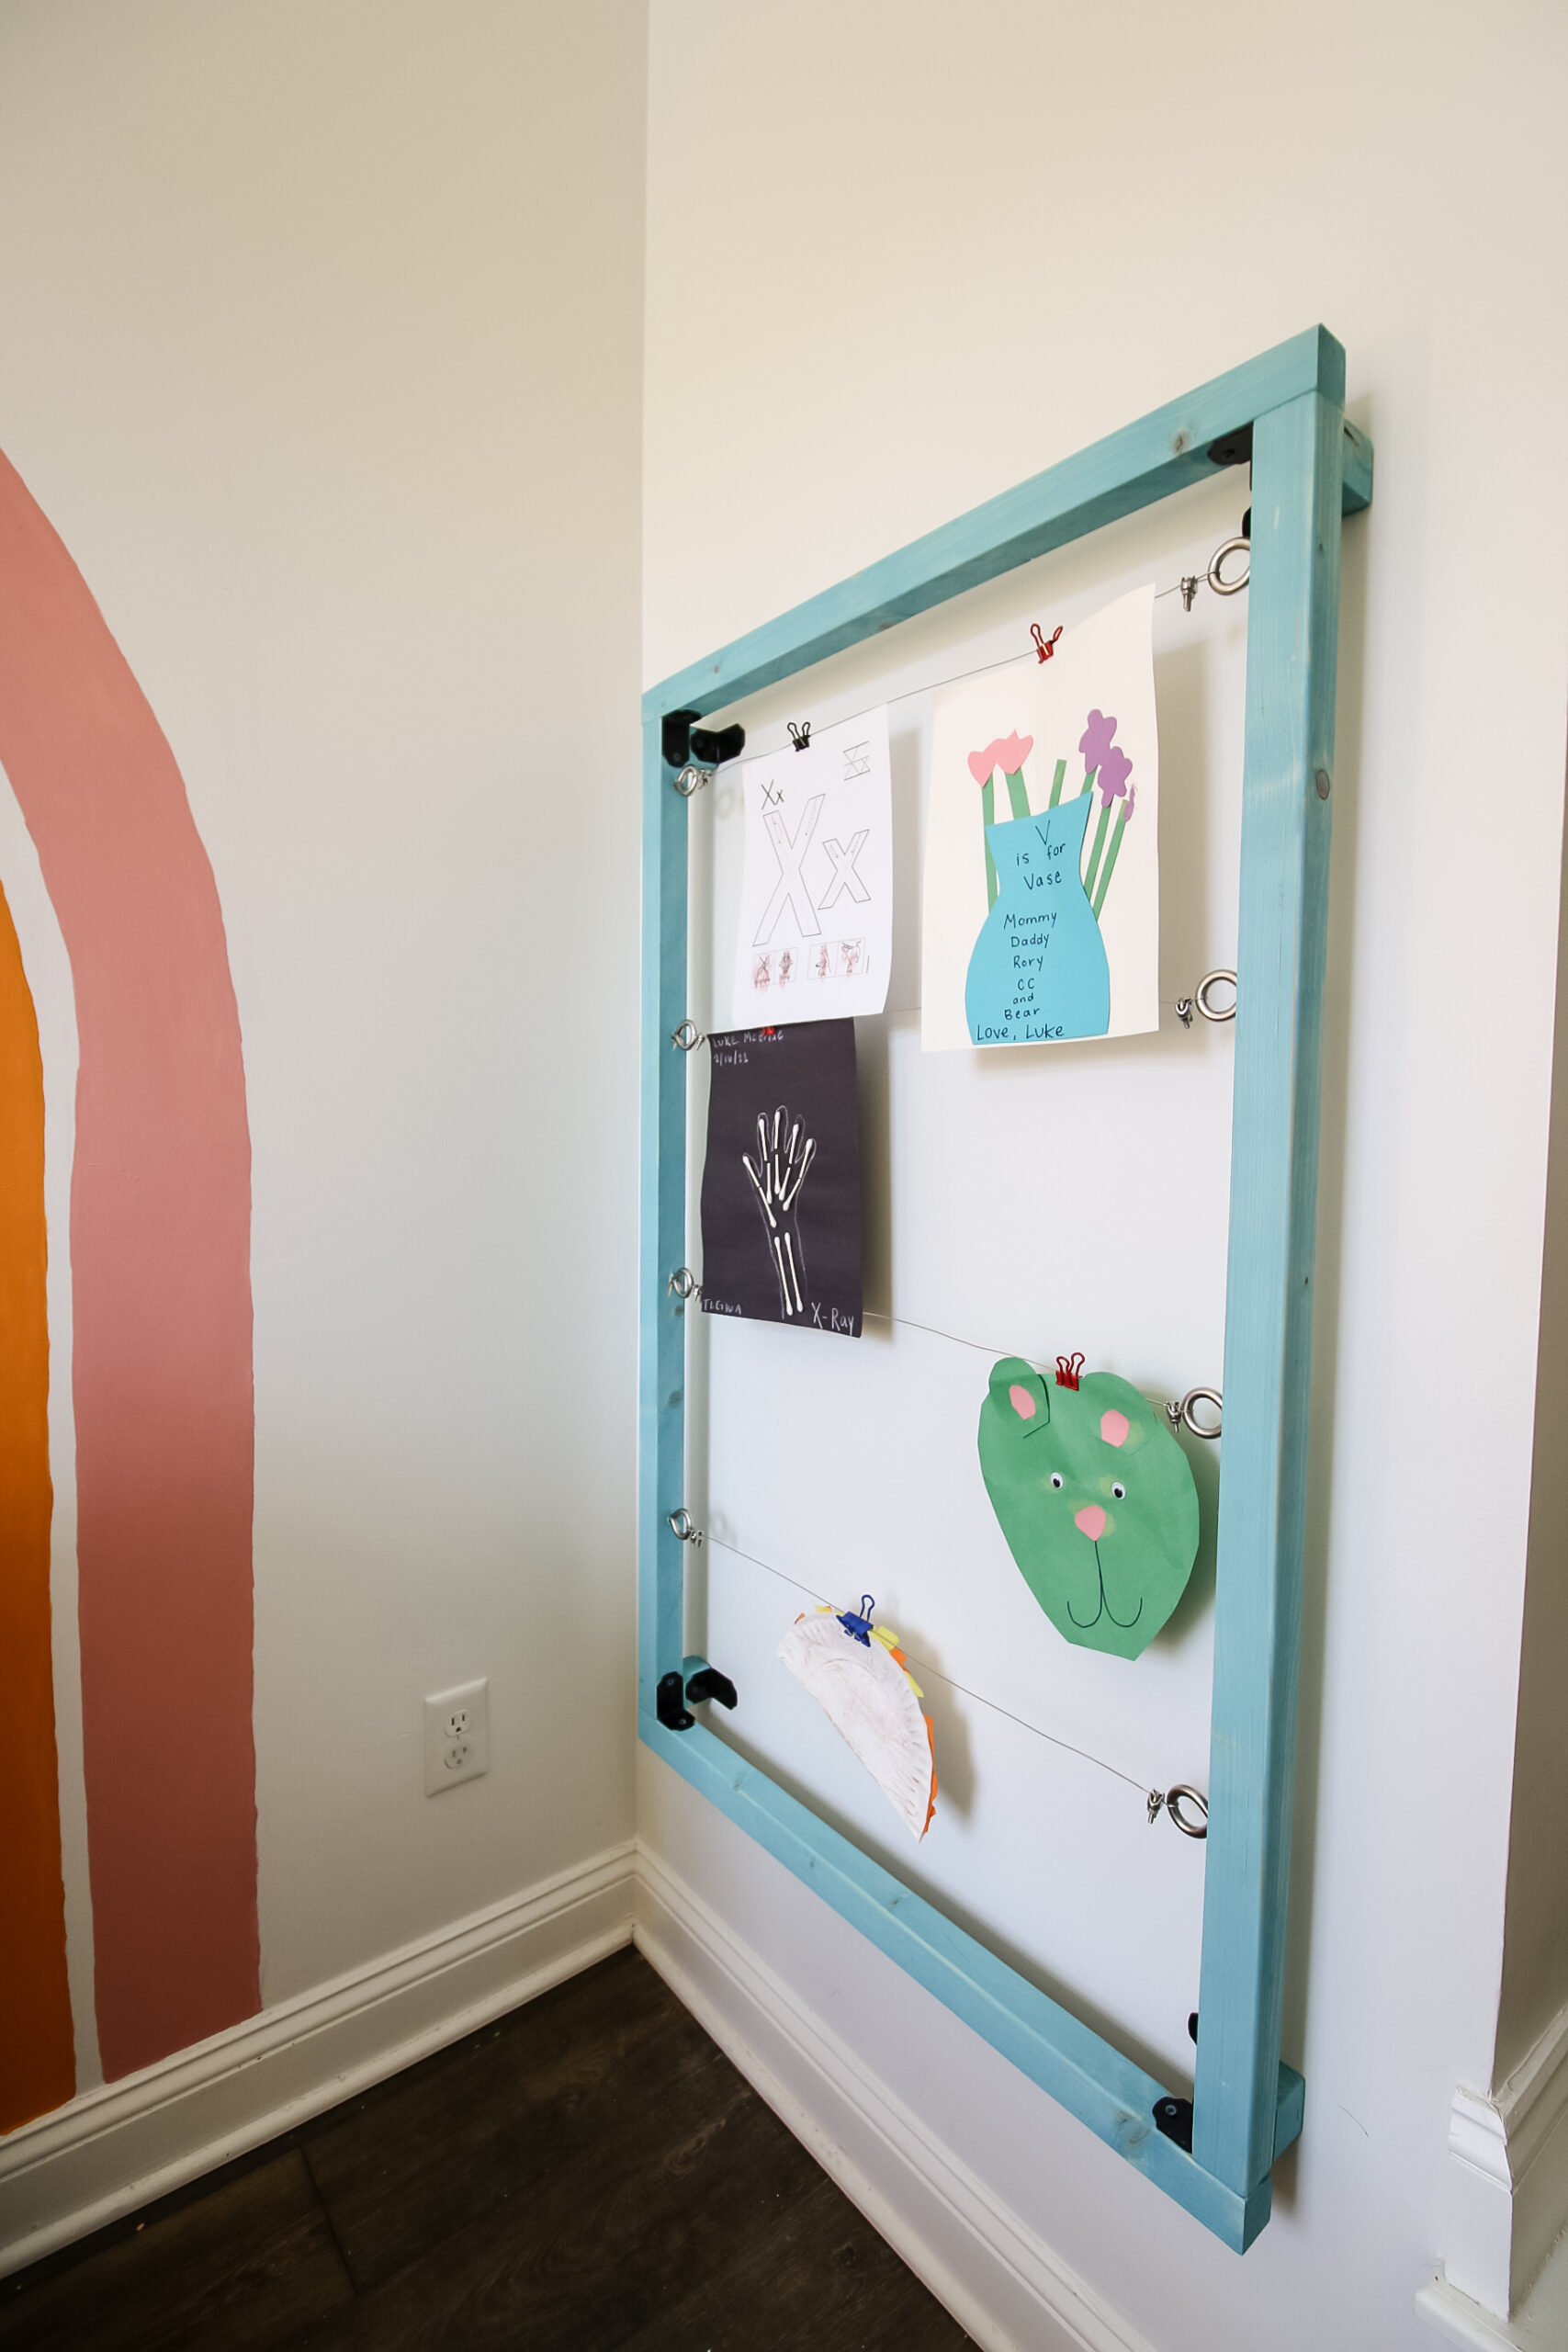 How to build a kids art display